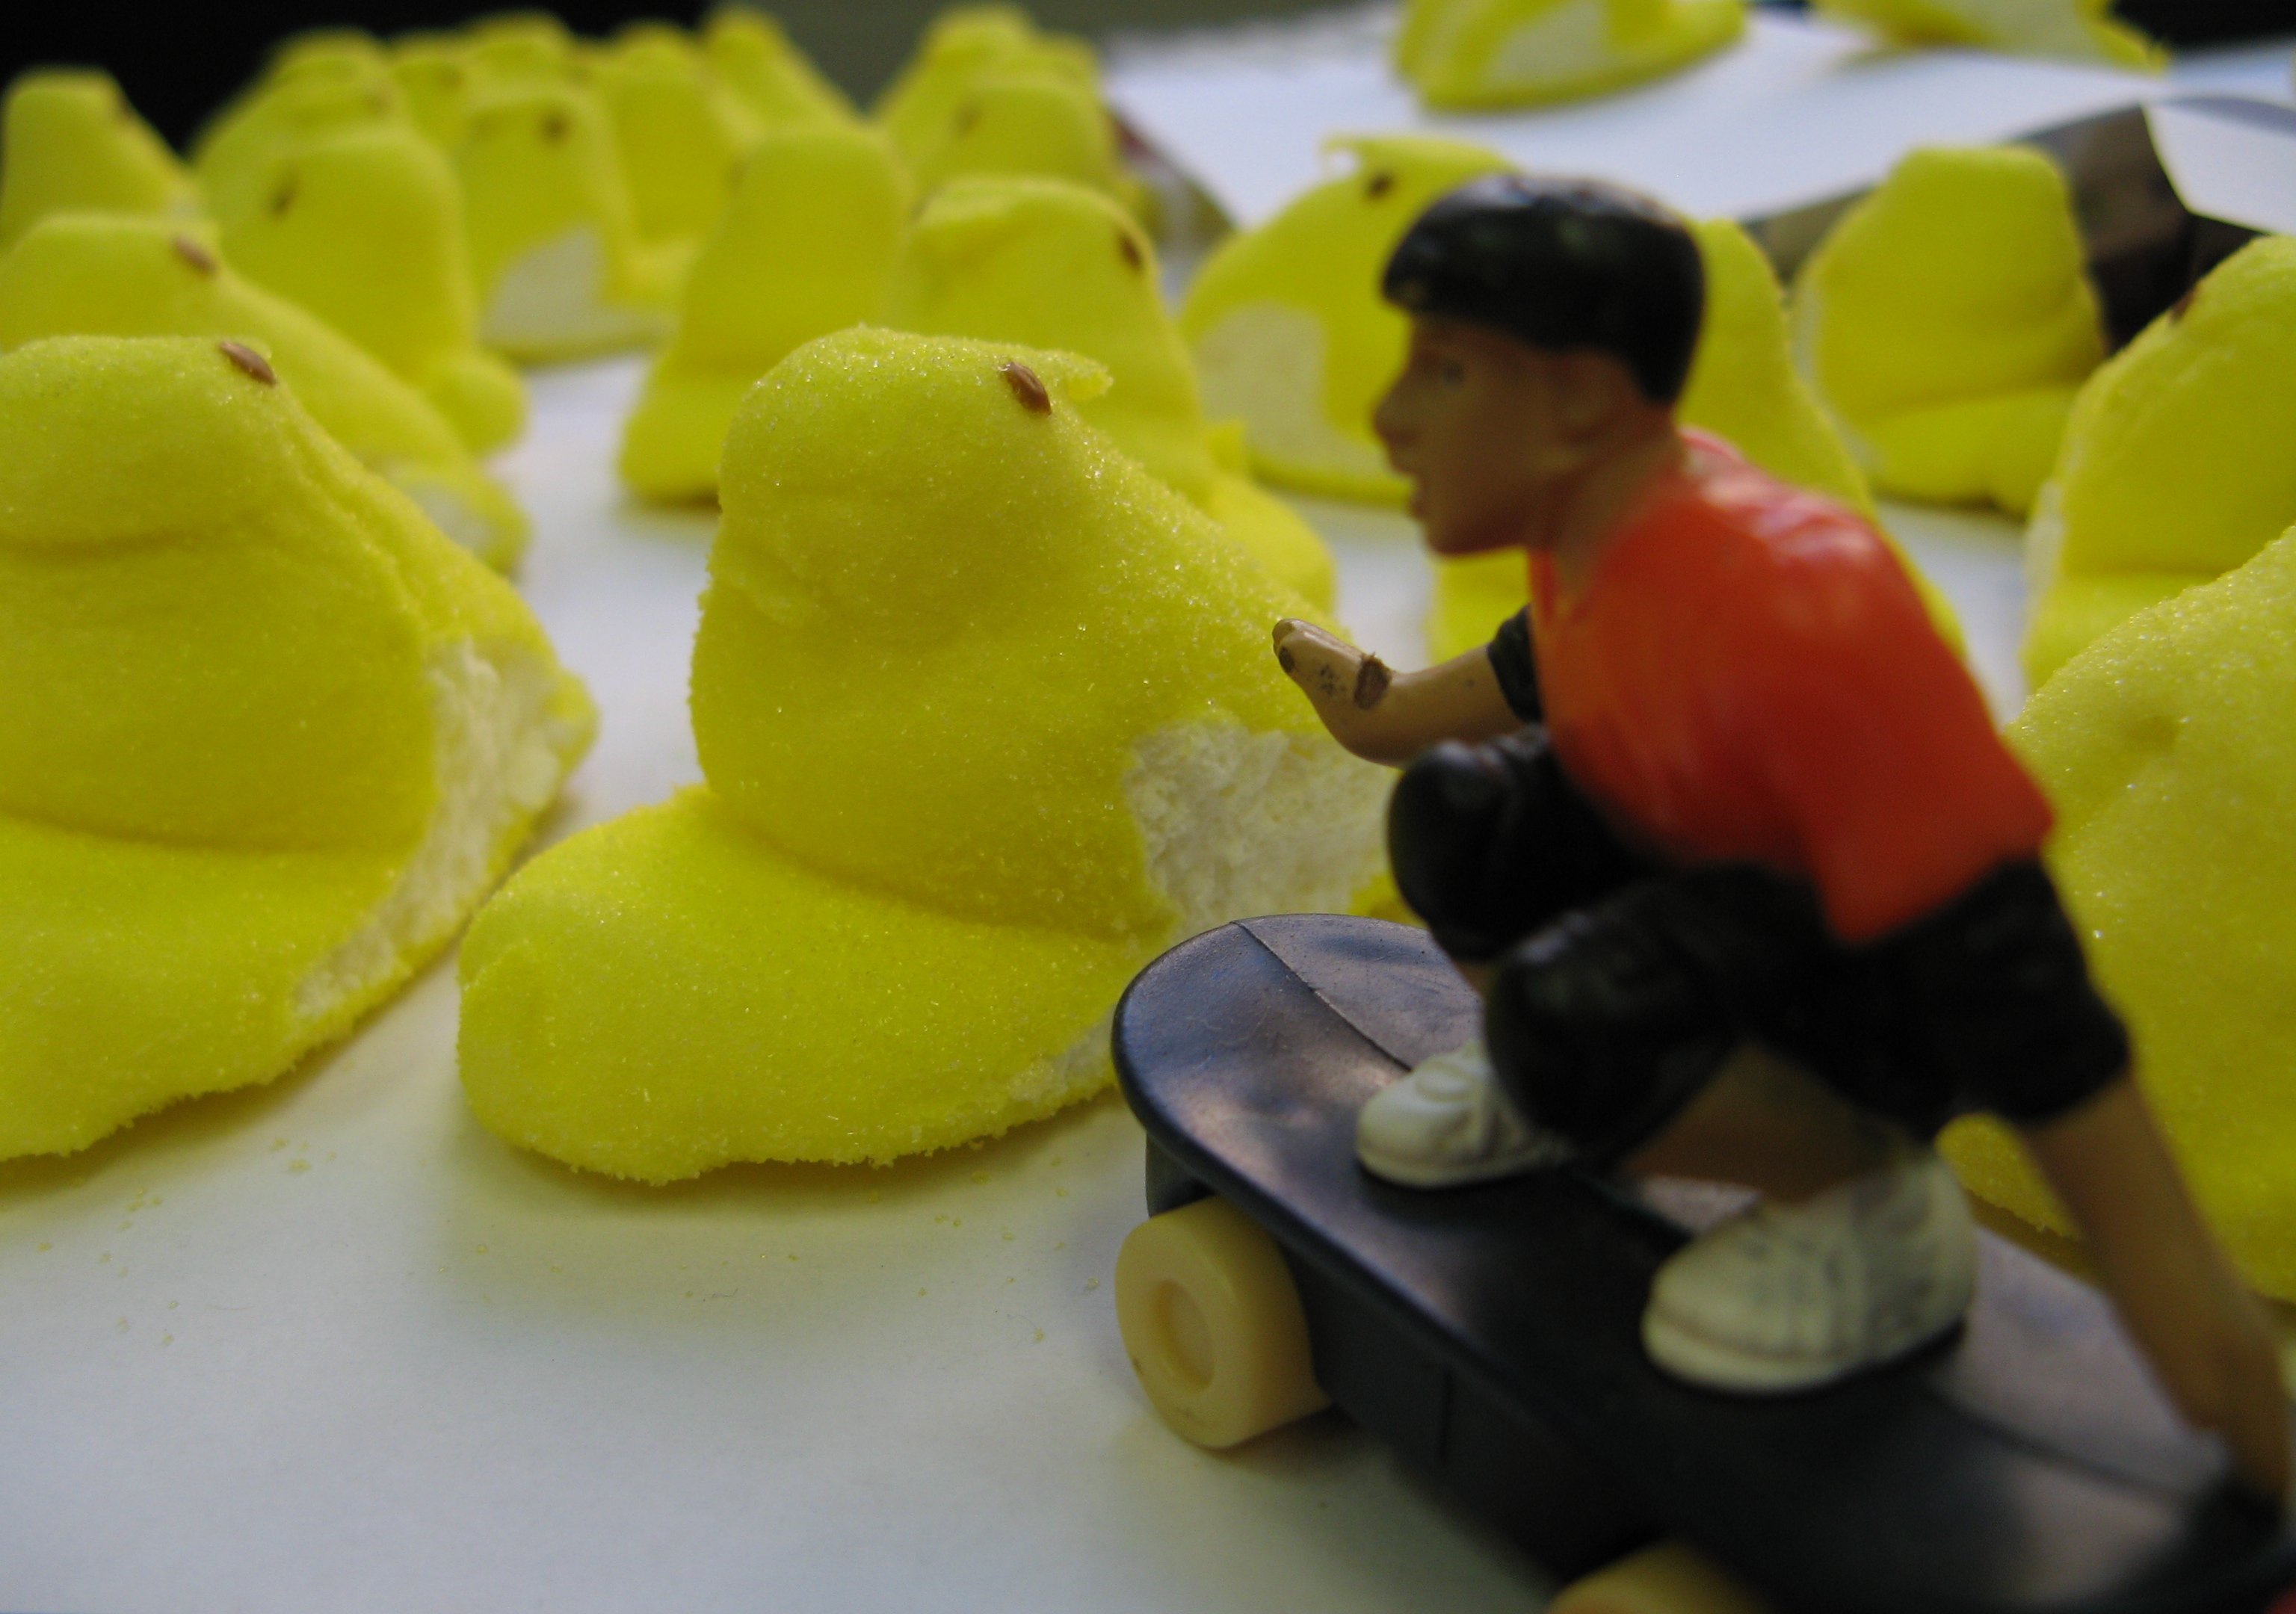 Watch out, Mr. Peep!